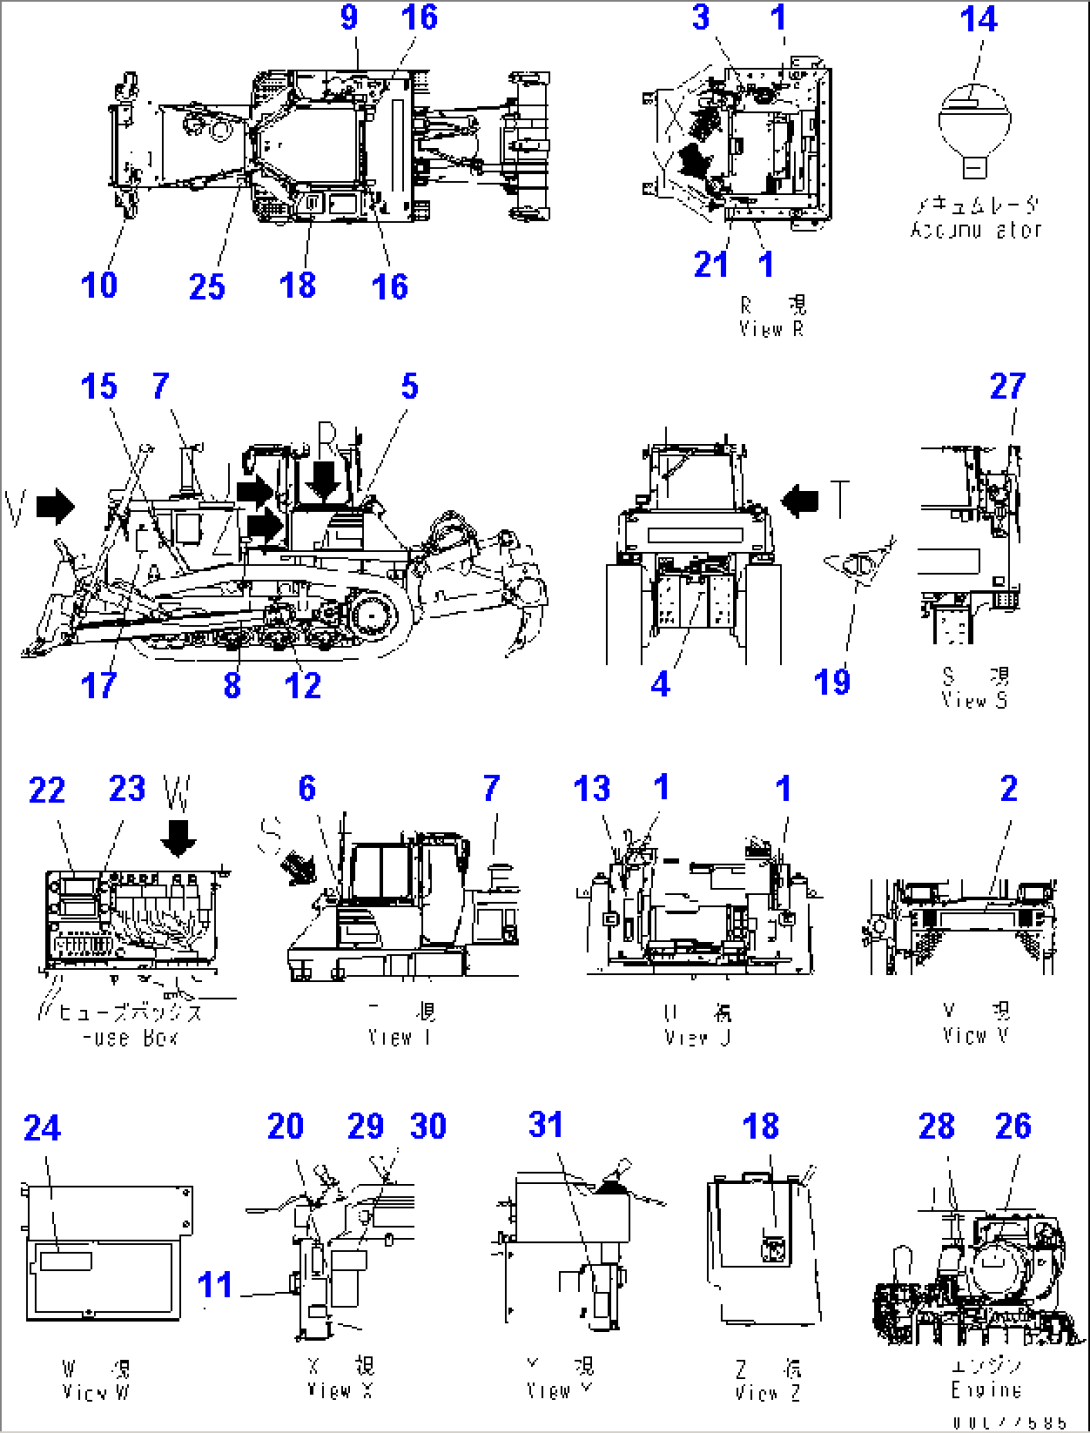 MARKS AND PLATES (FRENCH)(#80001-80806)